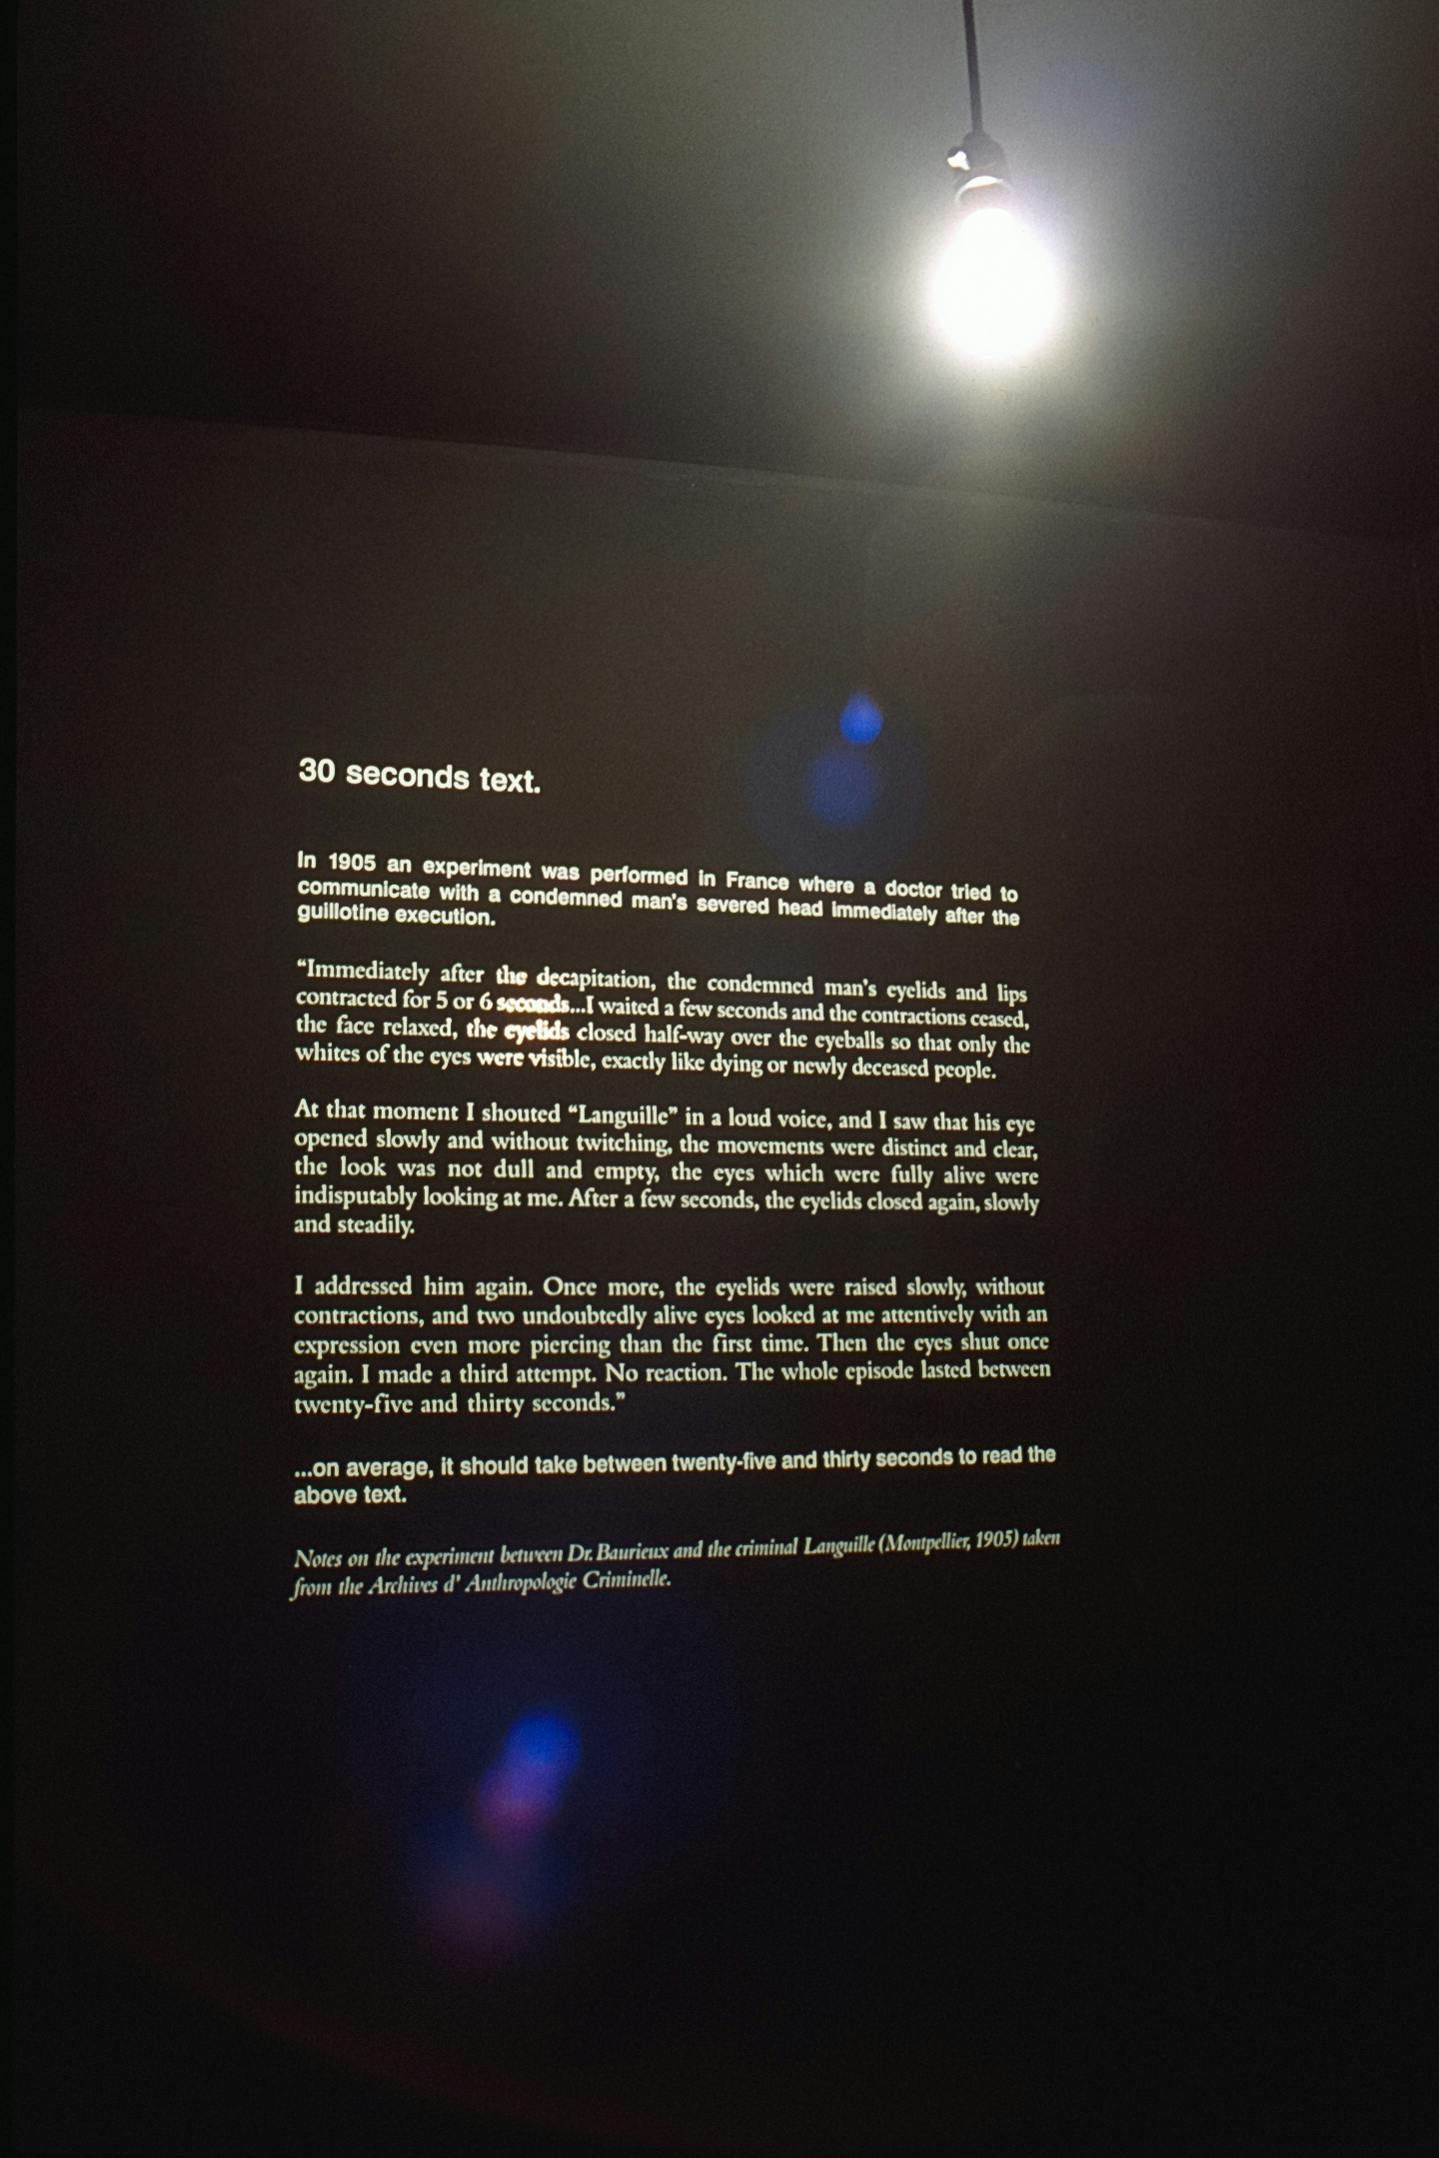 A text-based artwork is printed in white on a black gallery wall. This piece, titled 30 seconds text by Douglas Gordon, explains an experiment conducted in France in 1905.